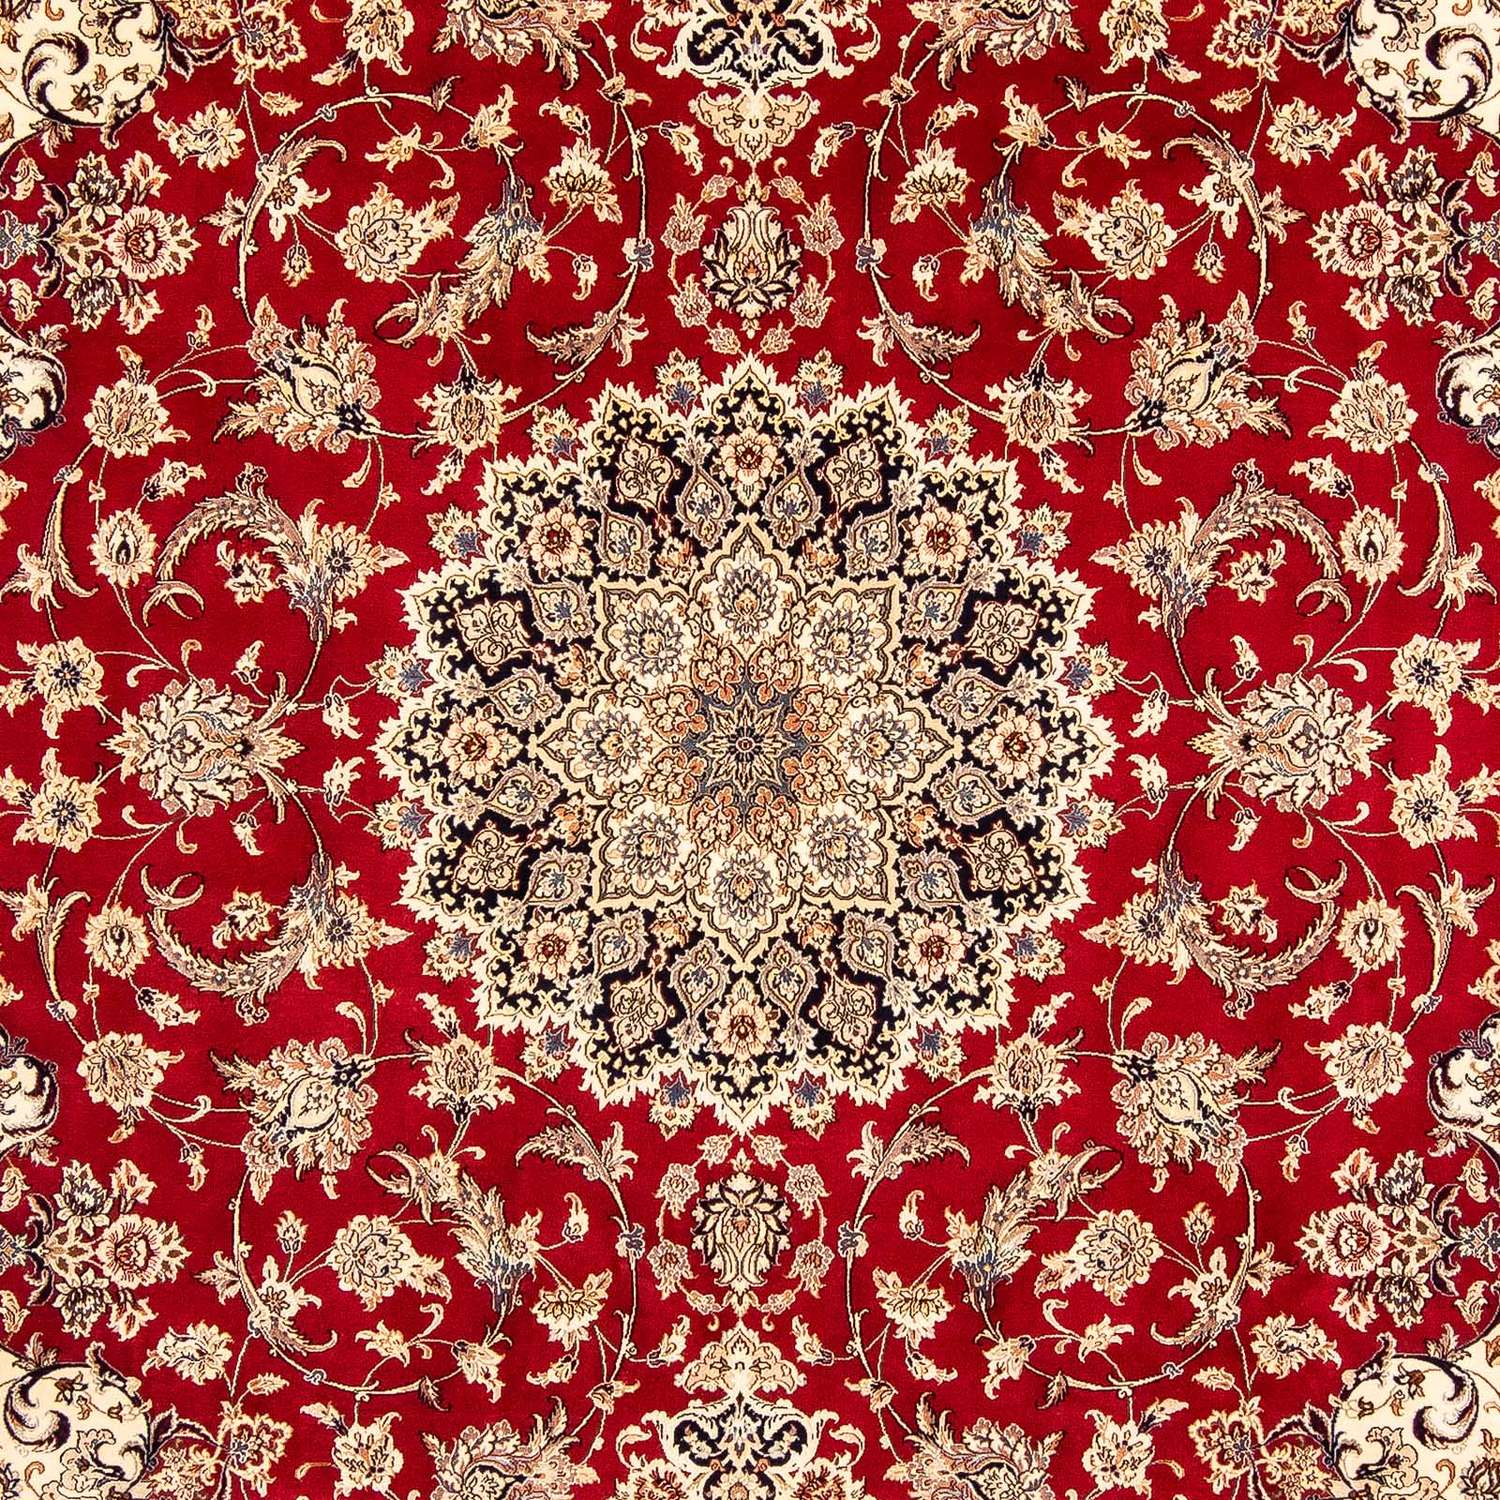 Perser Rug - Isfahan - Premium - 356 x 250 cm - red